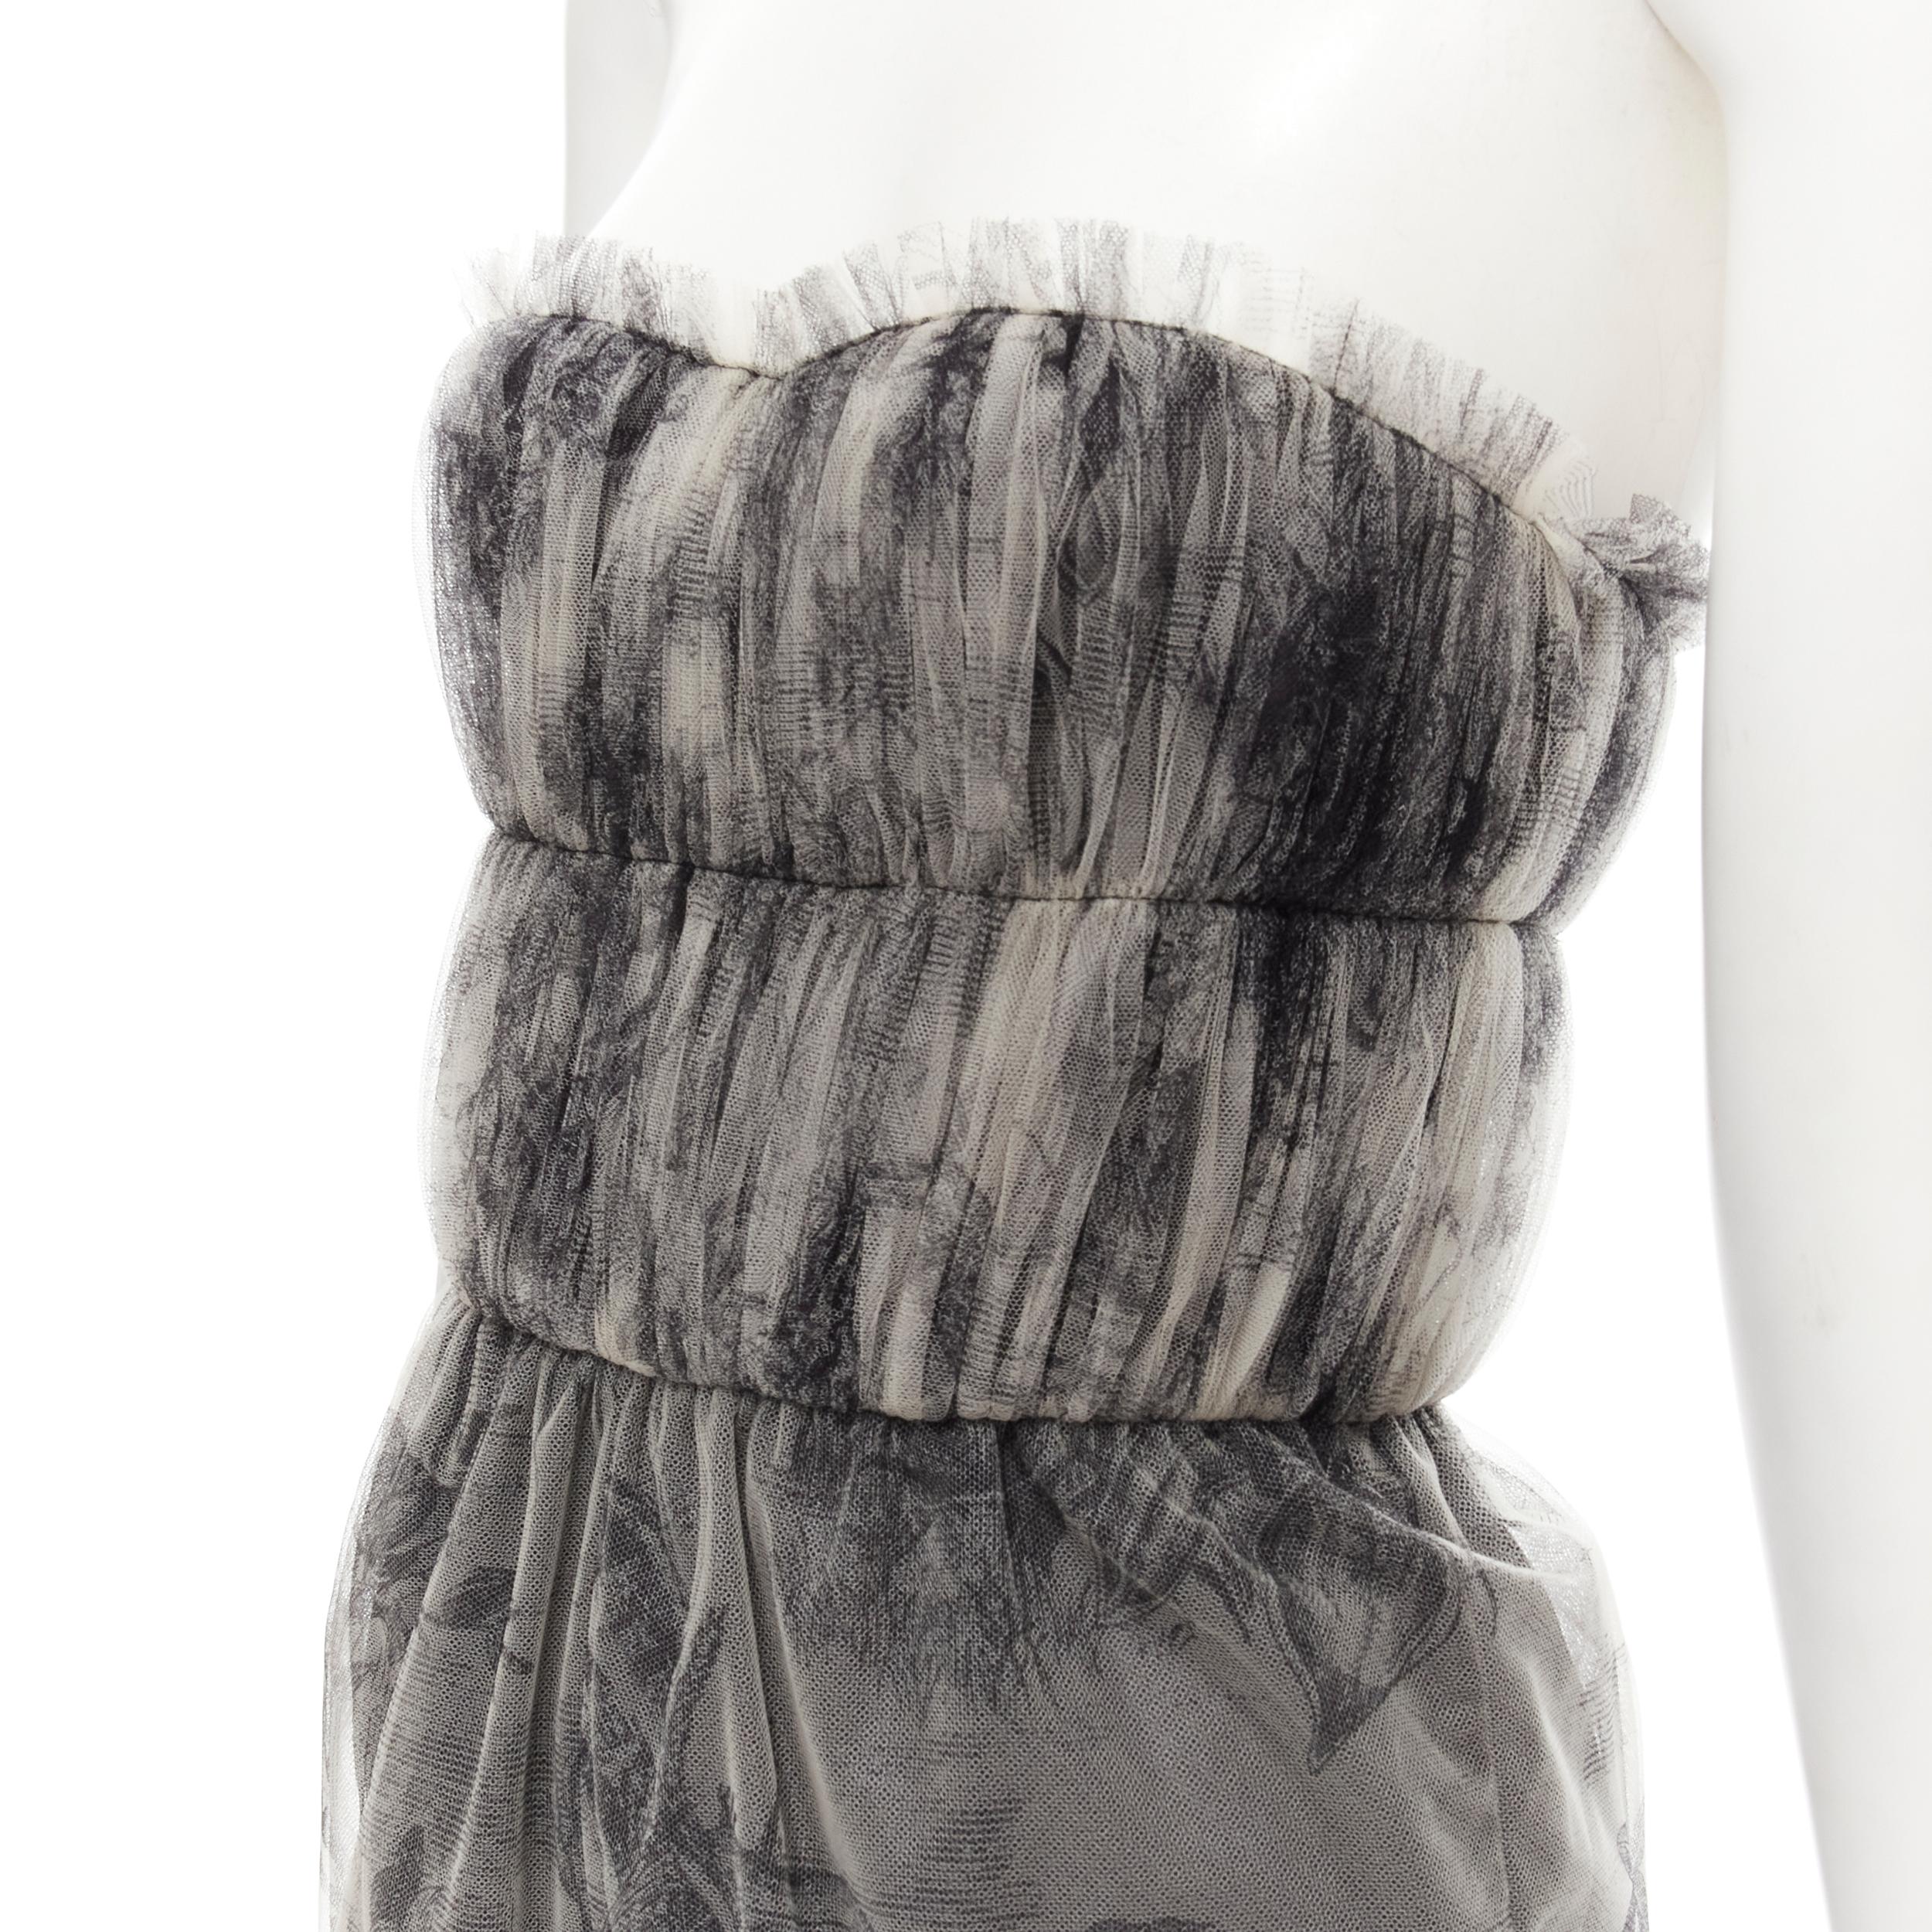 new CHRISTIAN DIOR Fantaisie Dioriviera tulle gathered pleated romper FR34 XS
Brand: Christian Dior
Designer: Maria Grazia Chiuri
Material: Polyamide
Color: Grey
Pattern: Abstract
Closure: Zip
Extra Detail: Boned underwire bustier. Gathered pleat at